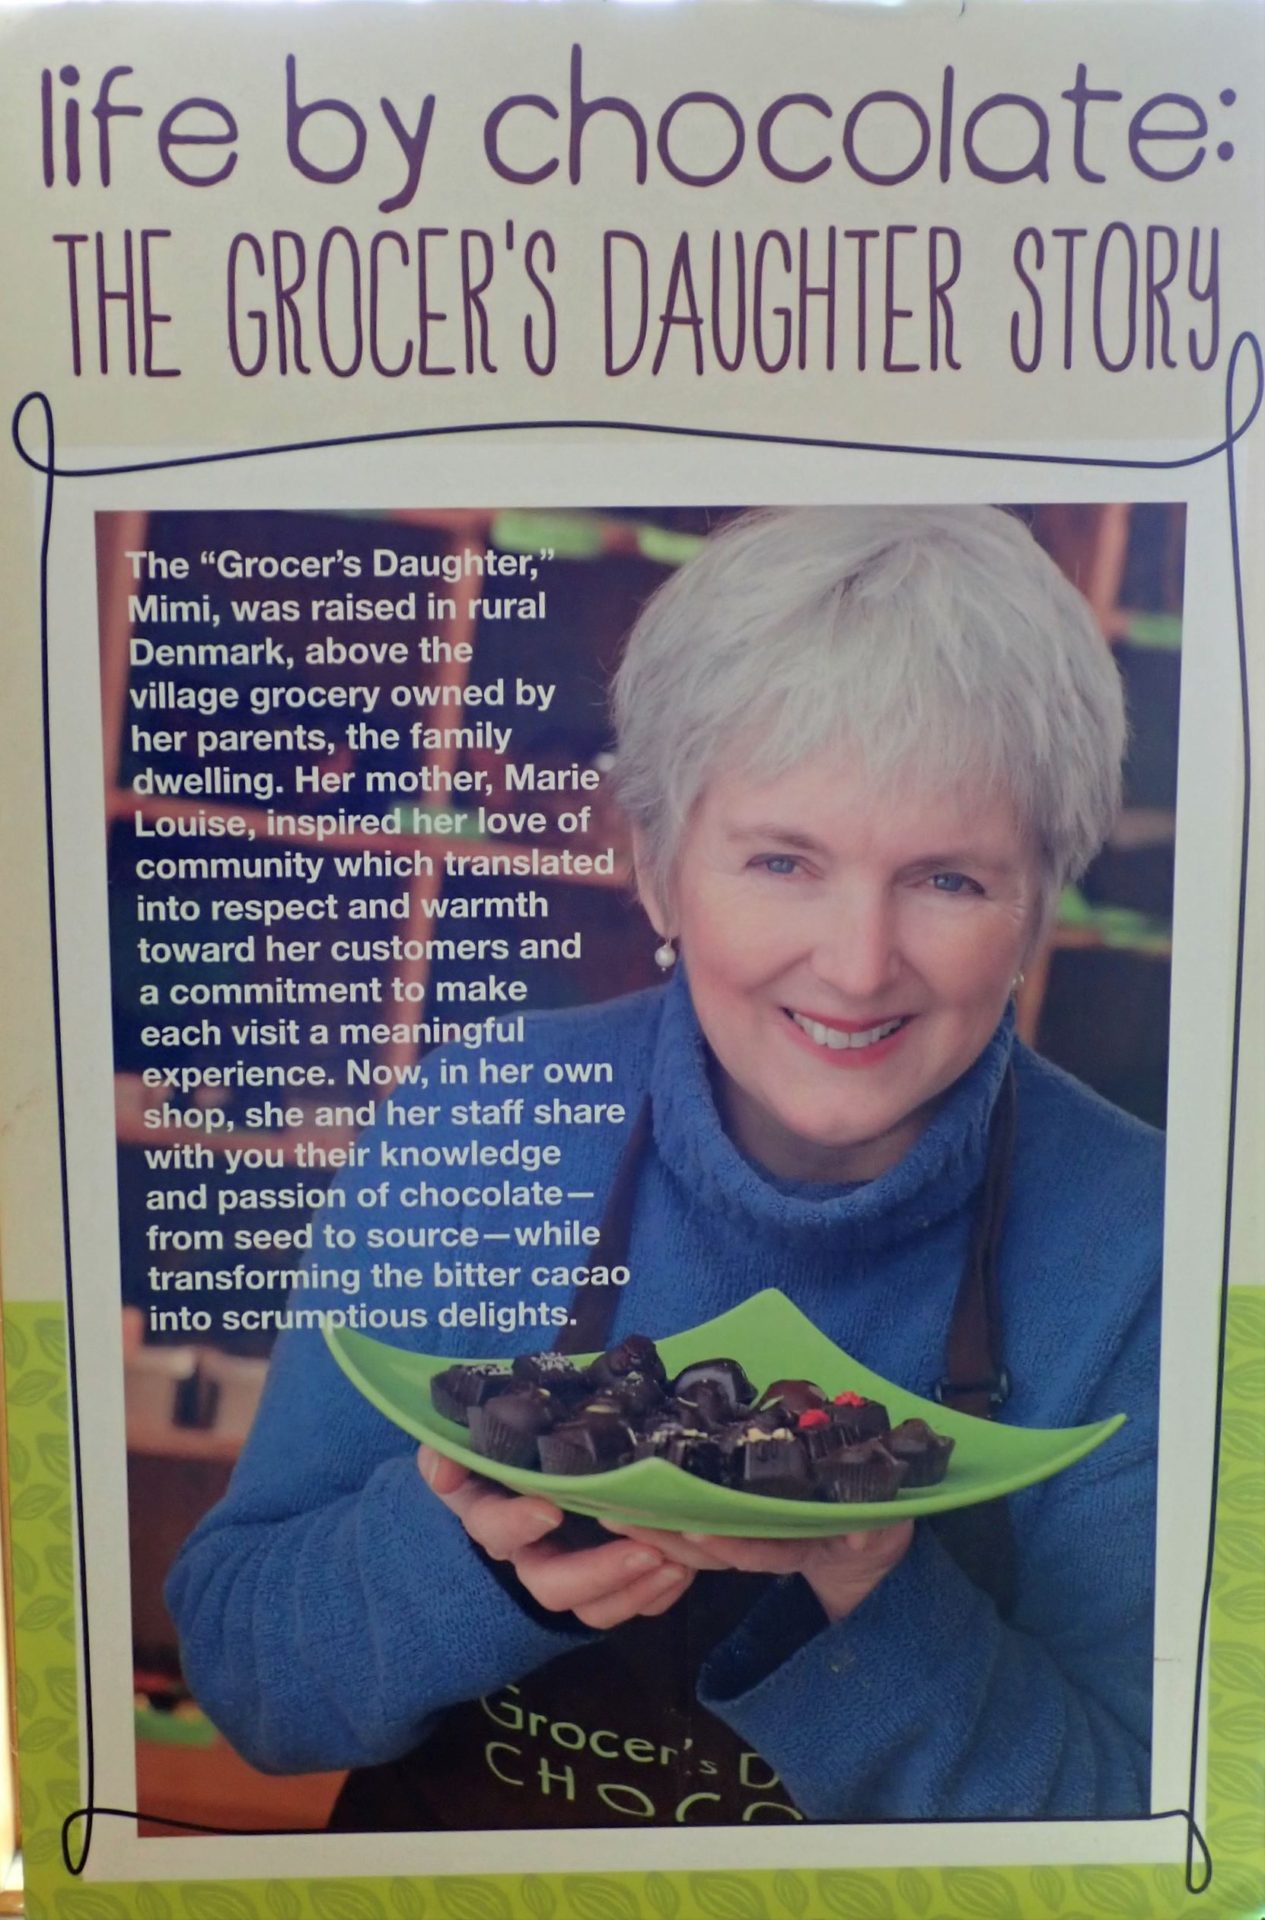 Grocer's Daughter Chocolate in Northern Michigan